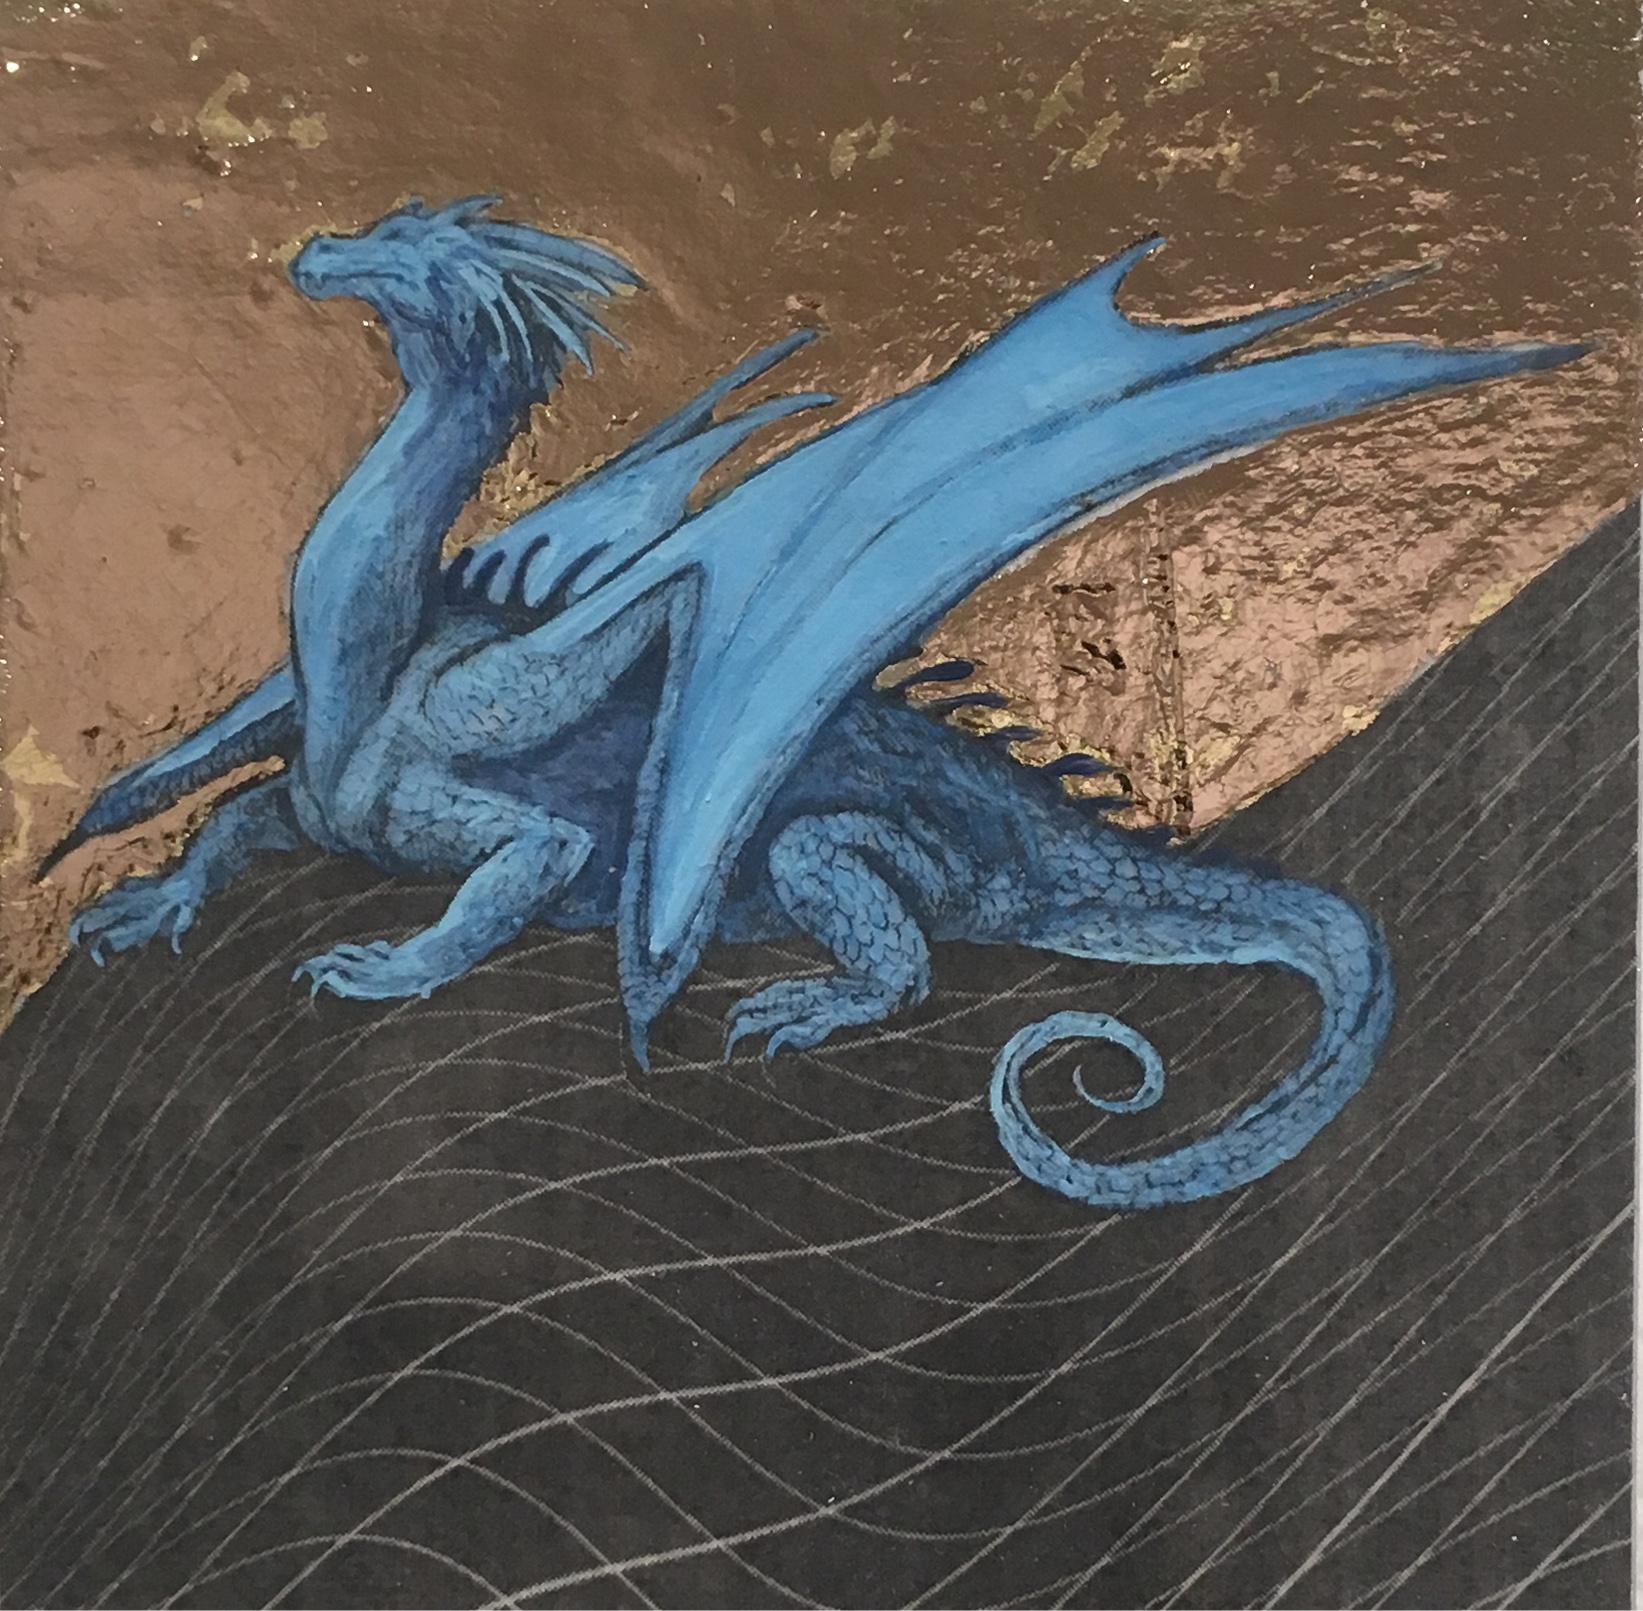 Cerulean Dragon, oil, metal foil, wood, mythical creature, figurative, animal  - Mixed Media Art by Alexis Kandra